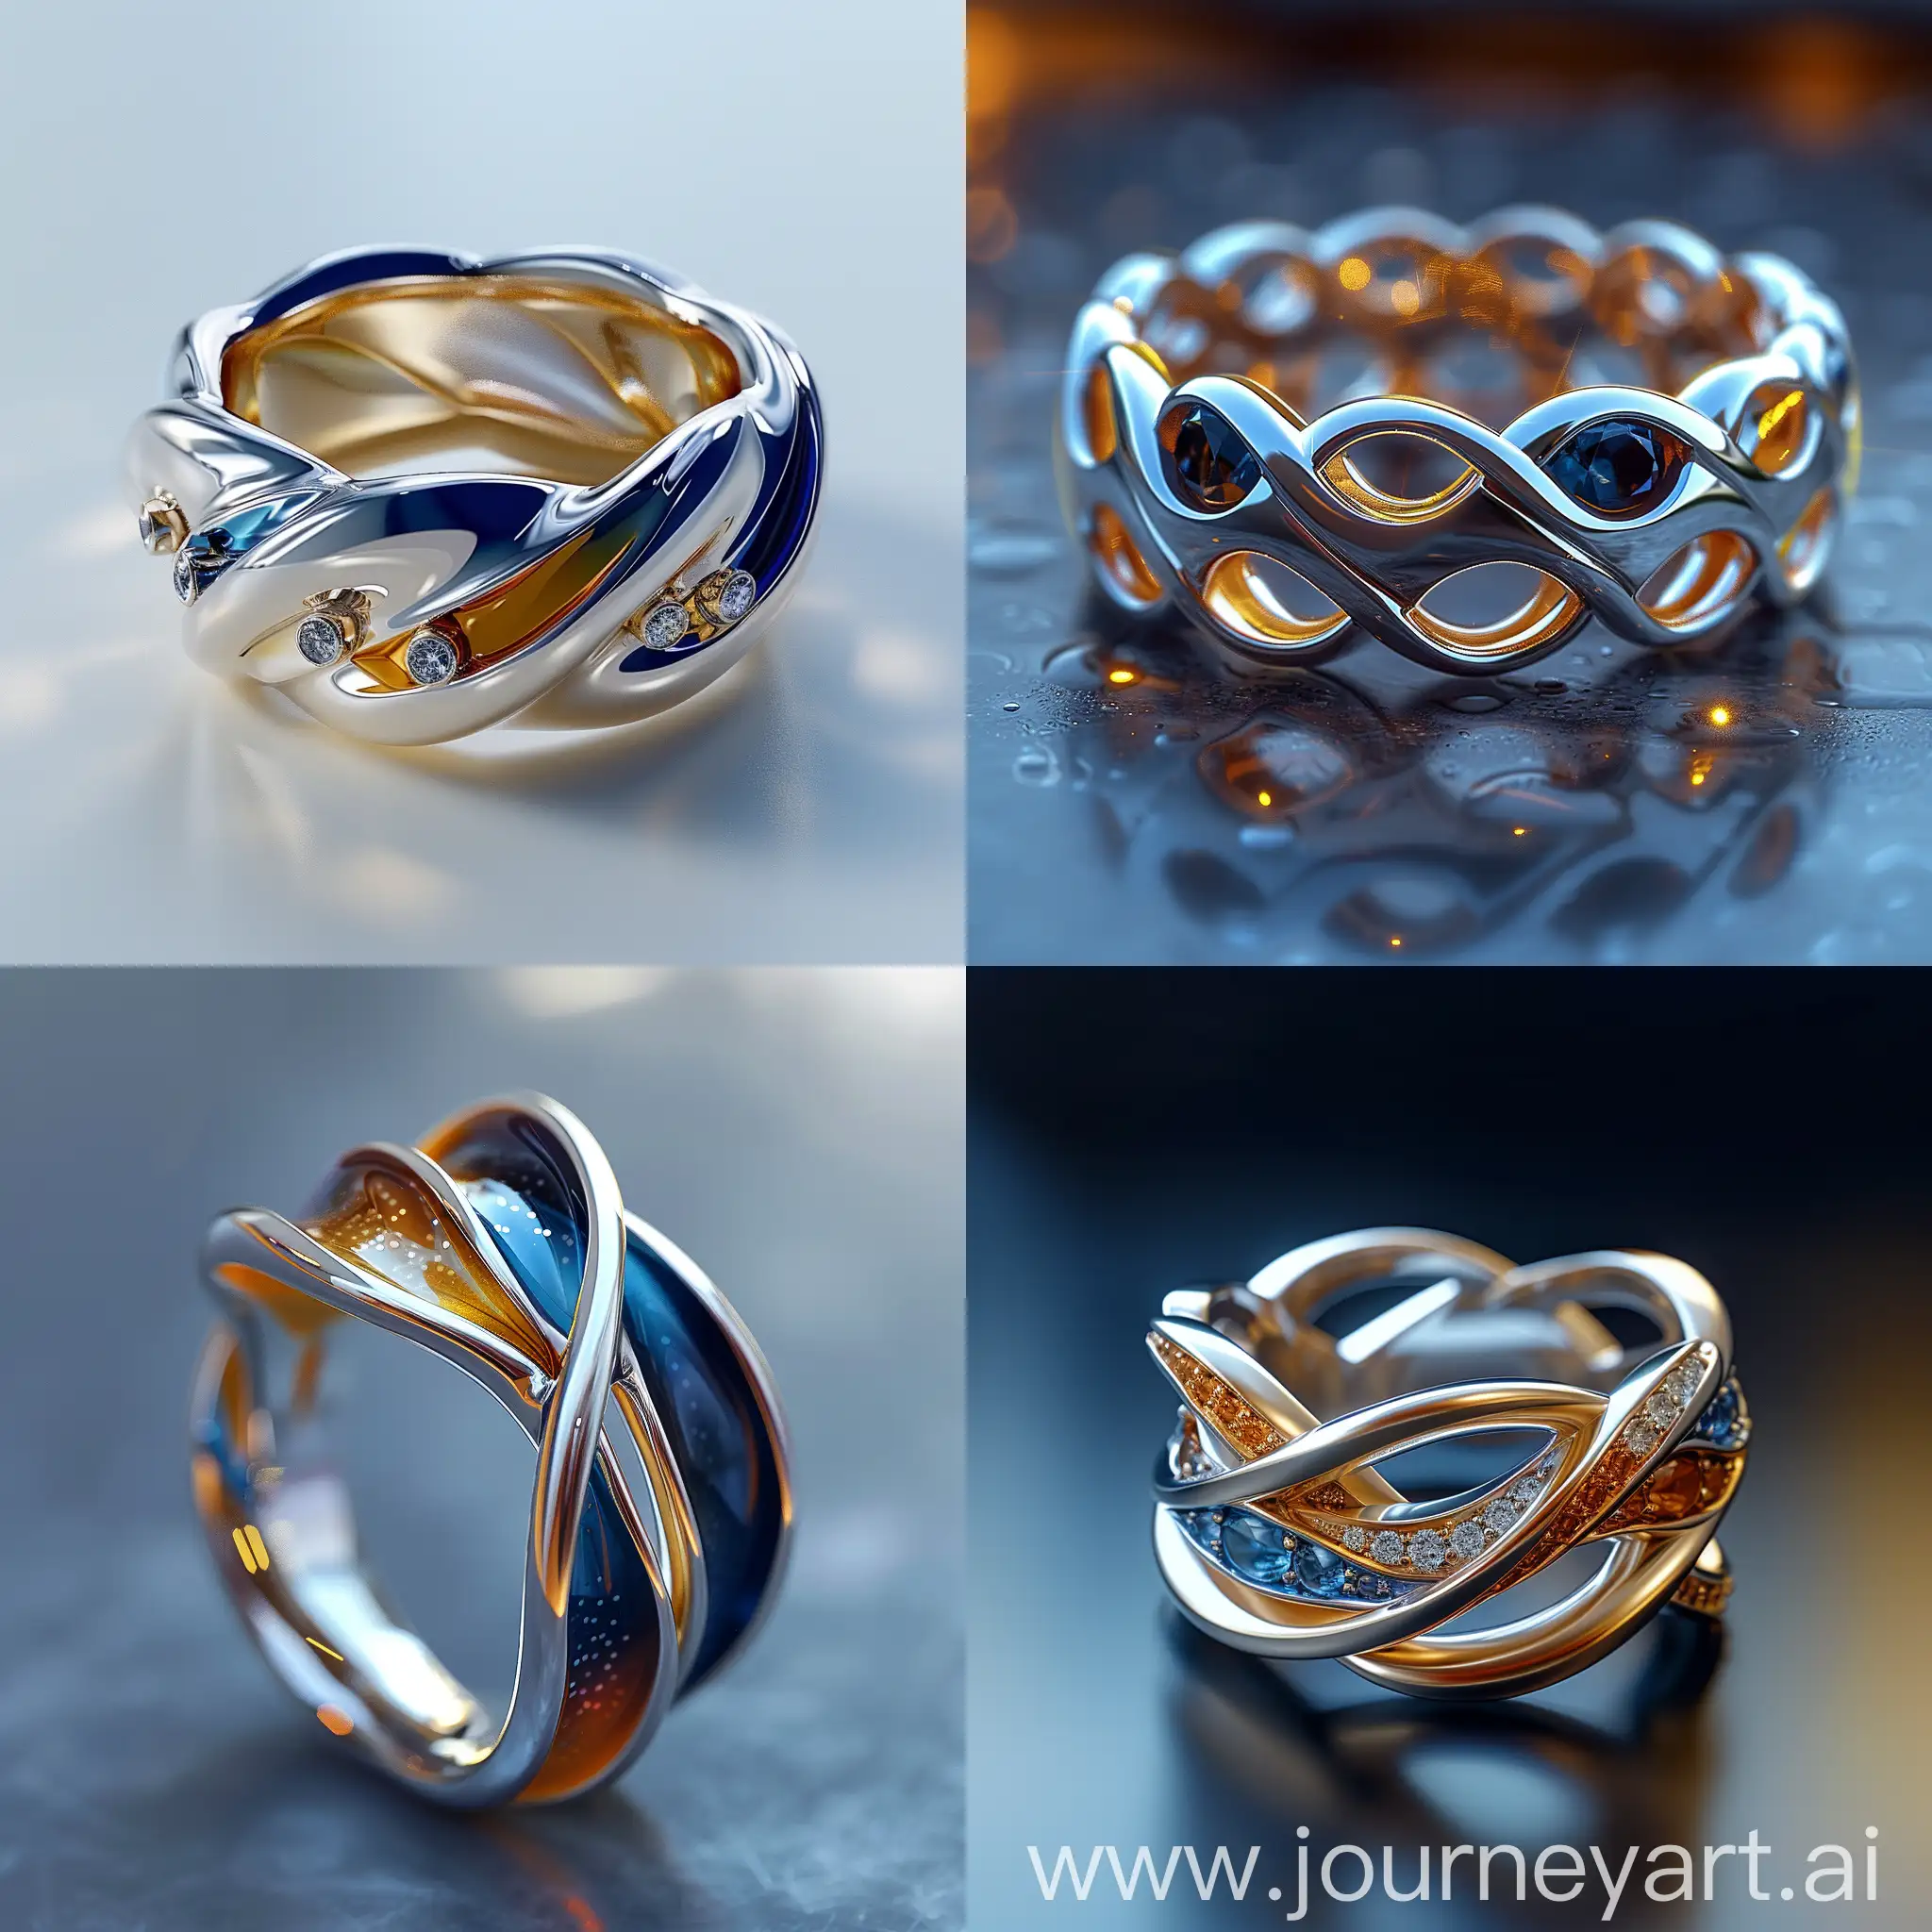 Mens-Interlocking-Line-and-Shape-Rings-Tranquil-Realistic-Blue-Tone-Jewelry